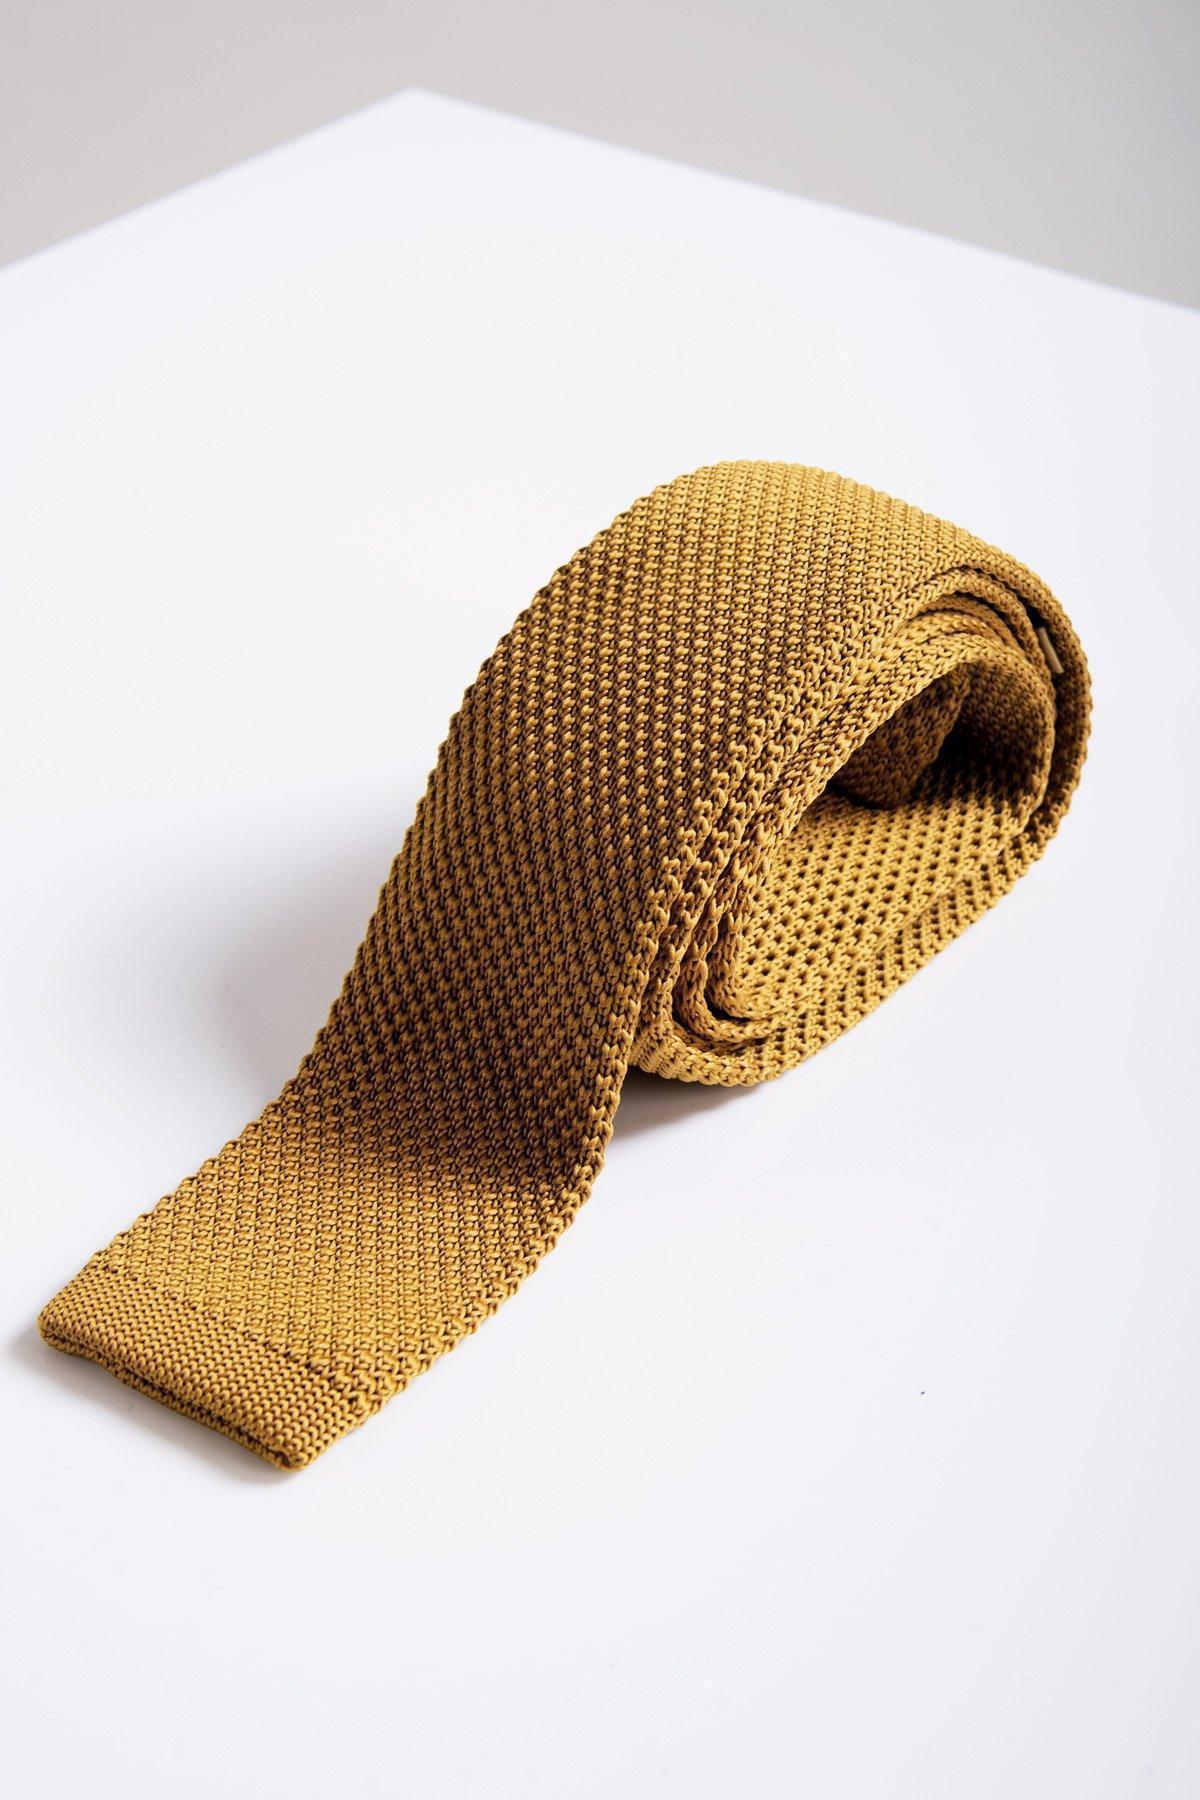 Knitted Ties by Marc Darcy - Spirit Clothing